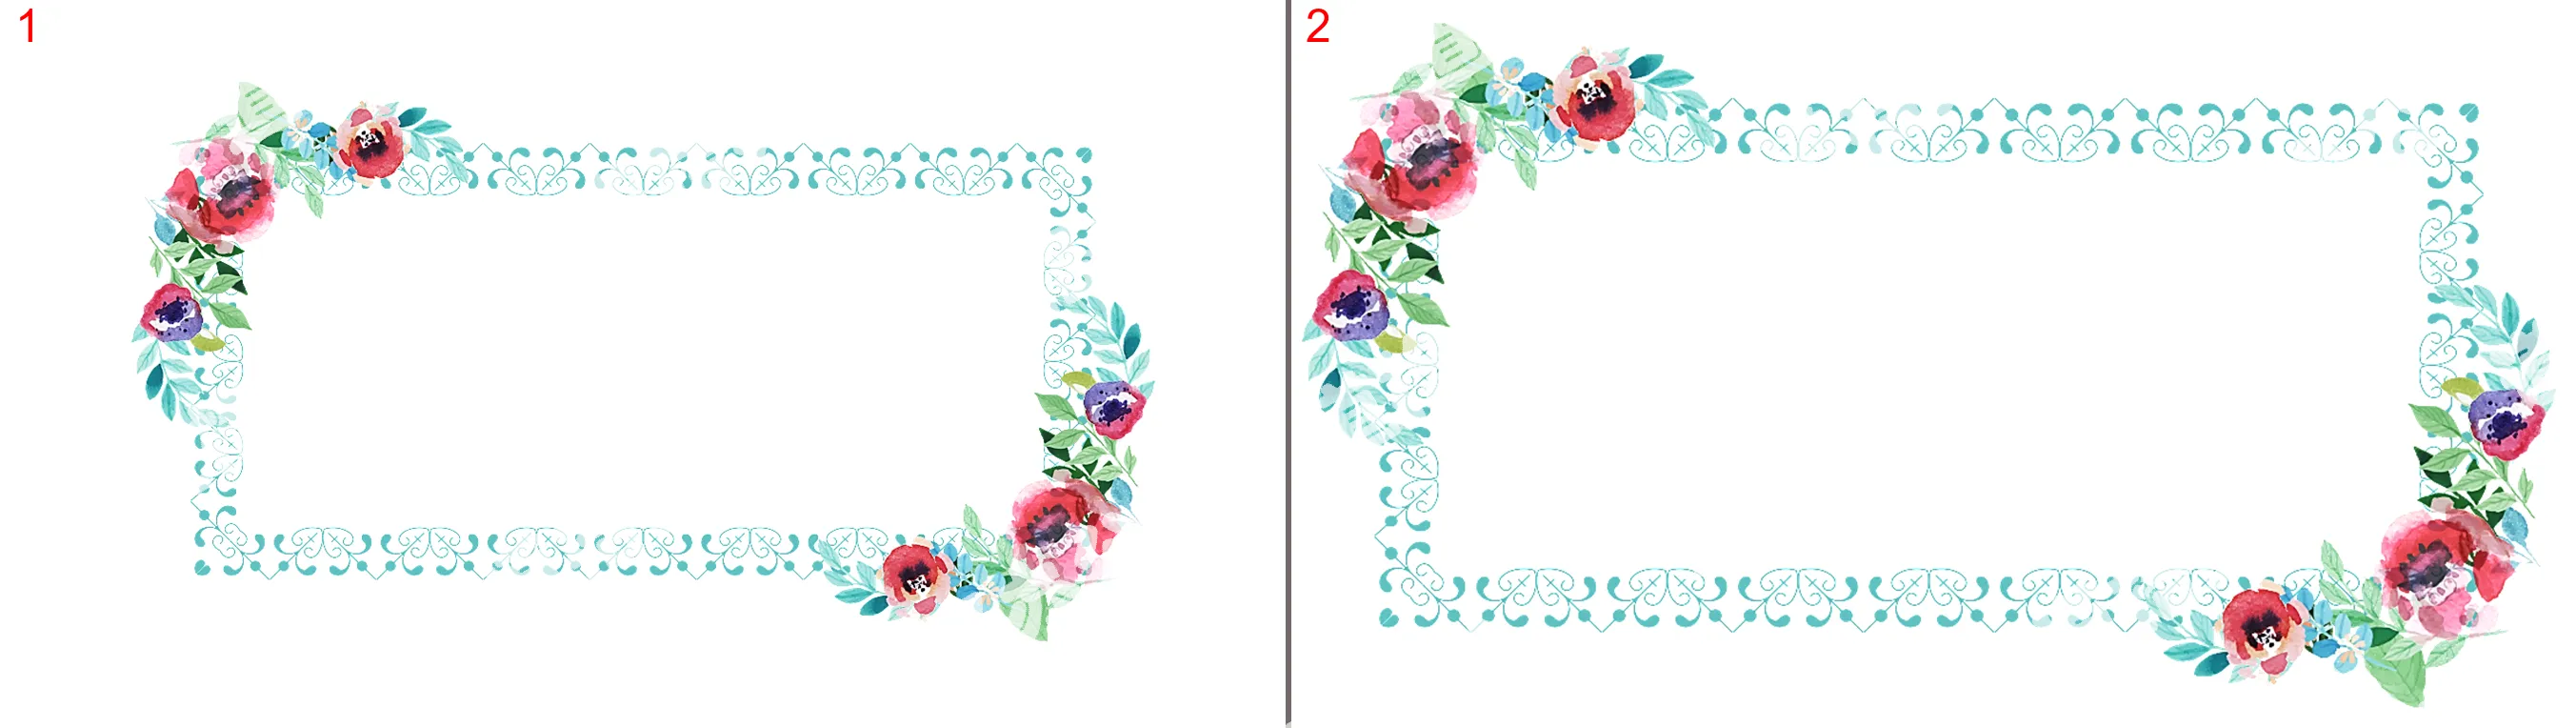 Watercolor flower border PPT background picture